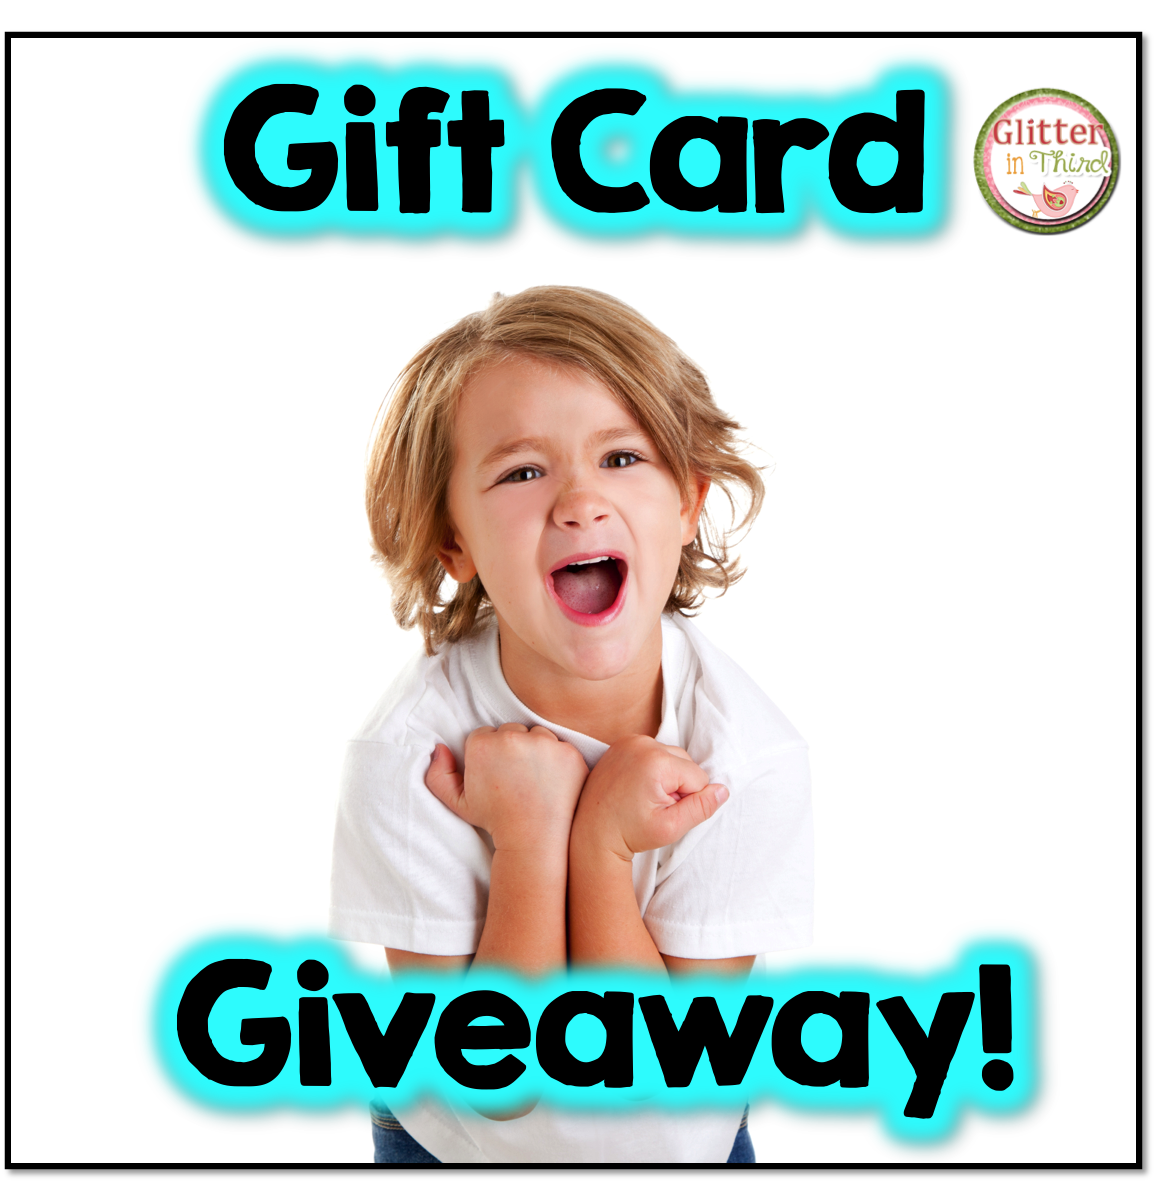 10-gift-card-giveaway-glitter-in-third